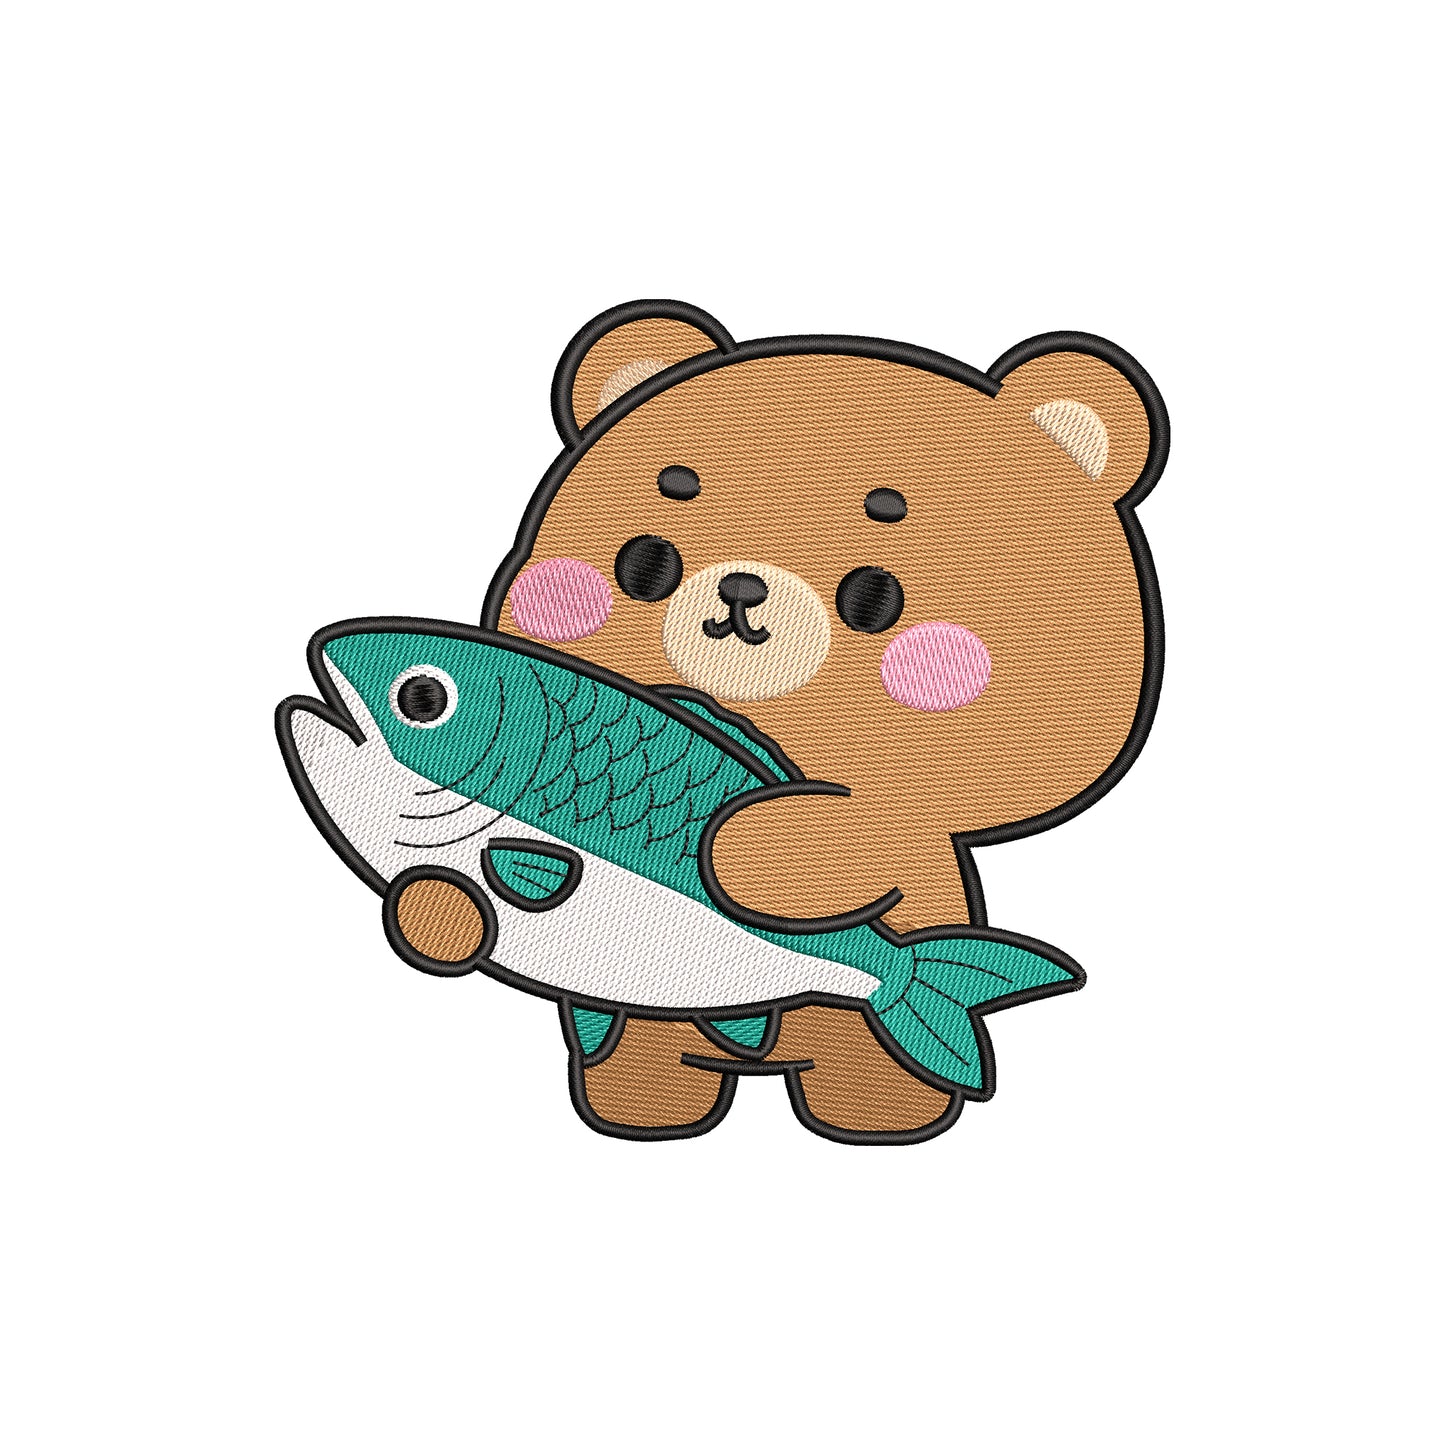 Bear catching fish embroidery designs for machine - 01042405